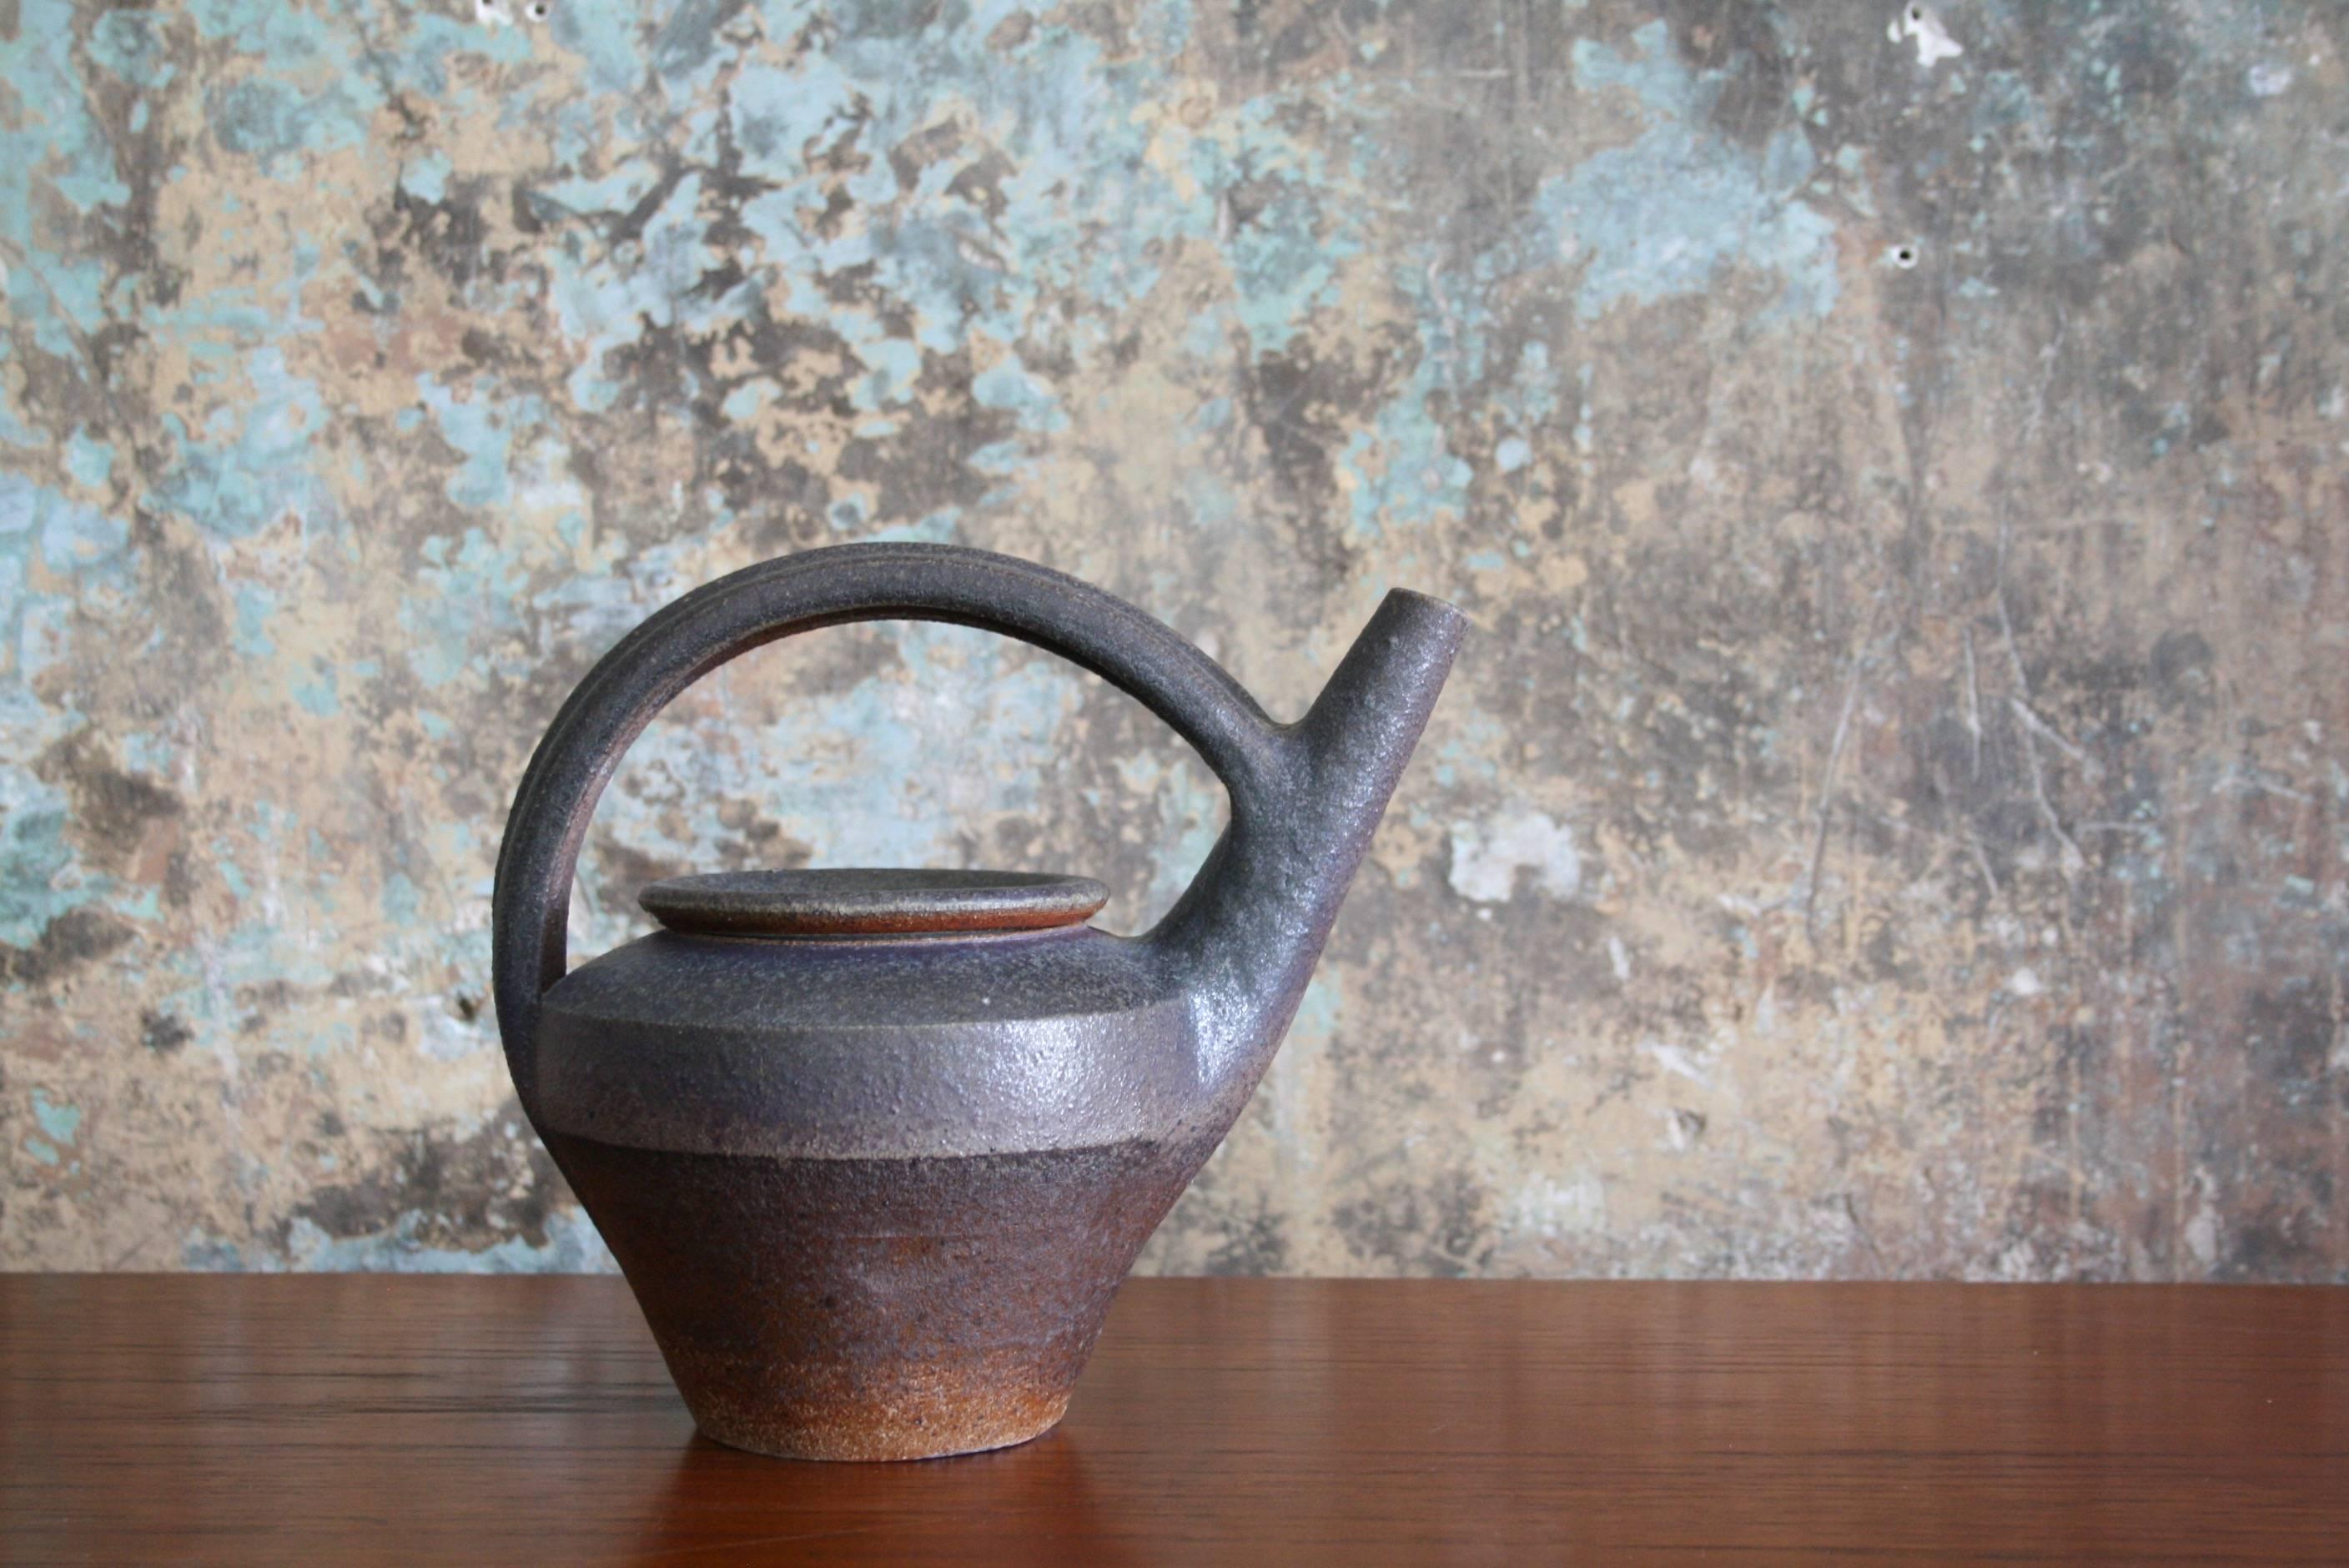 A hand thrown, lidded, functional stoneware teapot by highly regarded ceramic artist Karen Karnes (American, 1925-2016). This architectural orange and brown teapot features an overall rough texture, triangular body shape, and a semi-circular handle